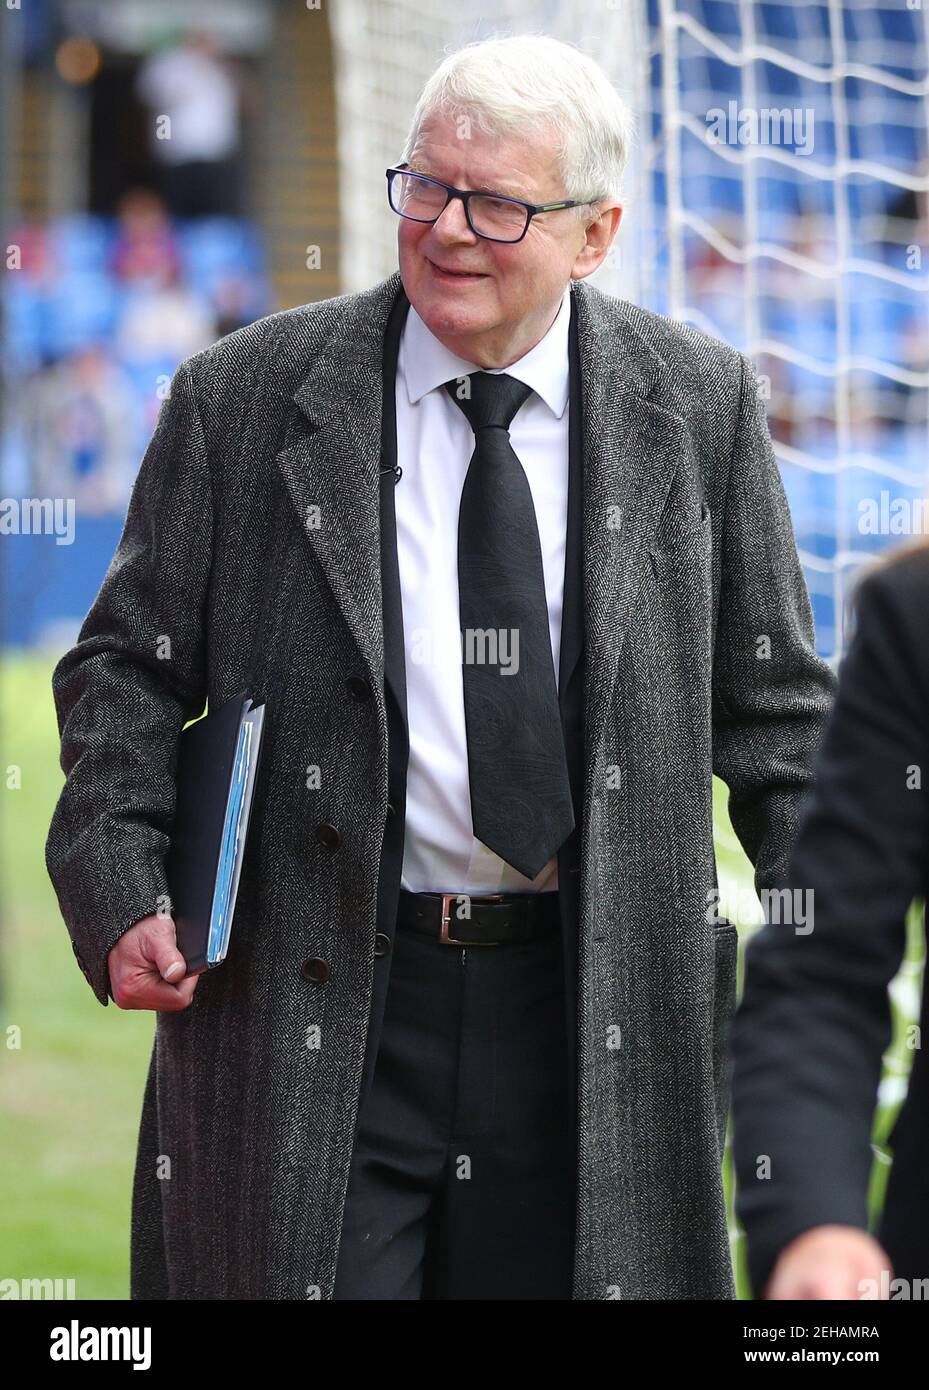 Soccer Football - Premier League - Crystal Palace vs West Bromwich Albion - Selhurst Park, London, Britain - May 13, 2018   Commentator John Motson inside the stadium before the match   REUTERS/Hannah McKay    EDITORIAL USE ONLY. No use with unauthorized audio, video, data, fixture lists, club/league logos or 'live' services. Online in-match use limited to 75 images, no video emulation. No use in betting, games or single club/league/player publications.  Please contact your account representative for further details. Stock Photo